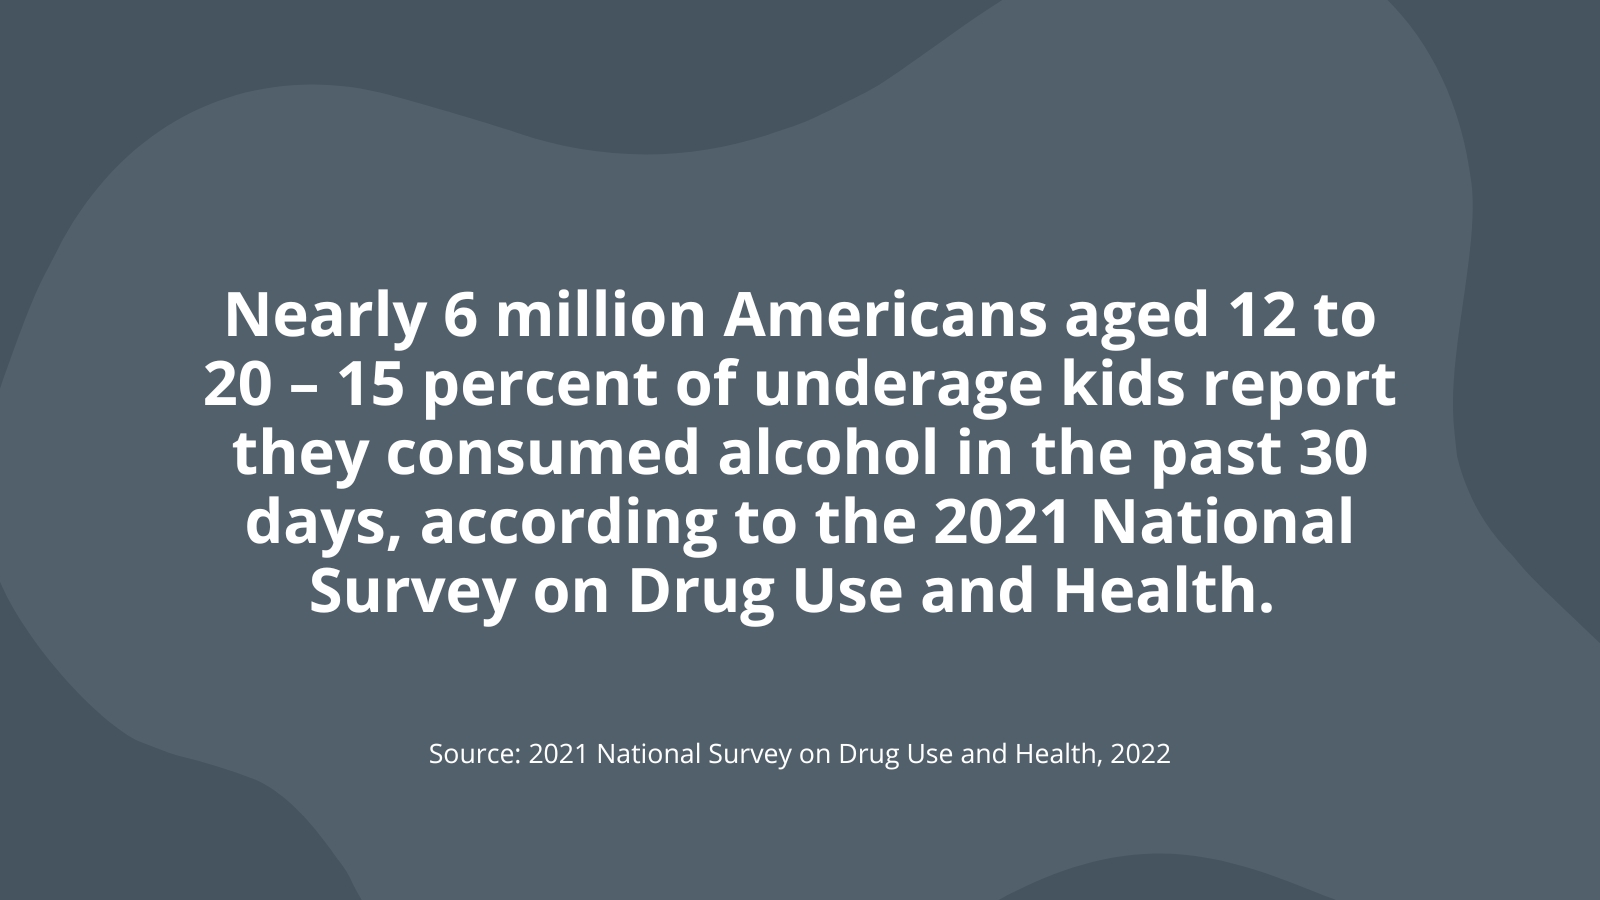 Nearly 6 million Americans aged 12 to 20 – 15 percent of underage kids report they consumed alcohol in the past 30 days, according to the 2021 National Survey on Drug Use and Health. 